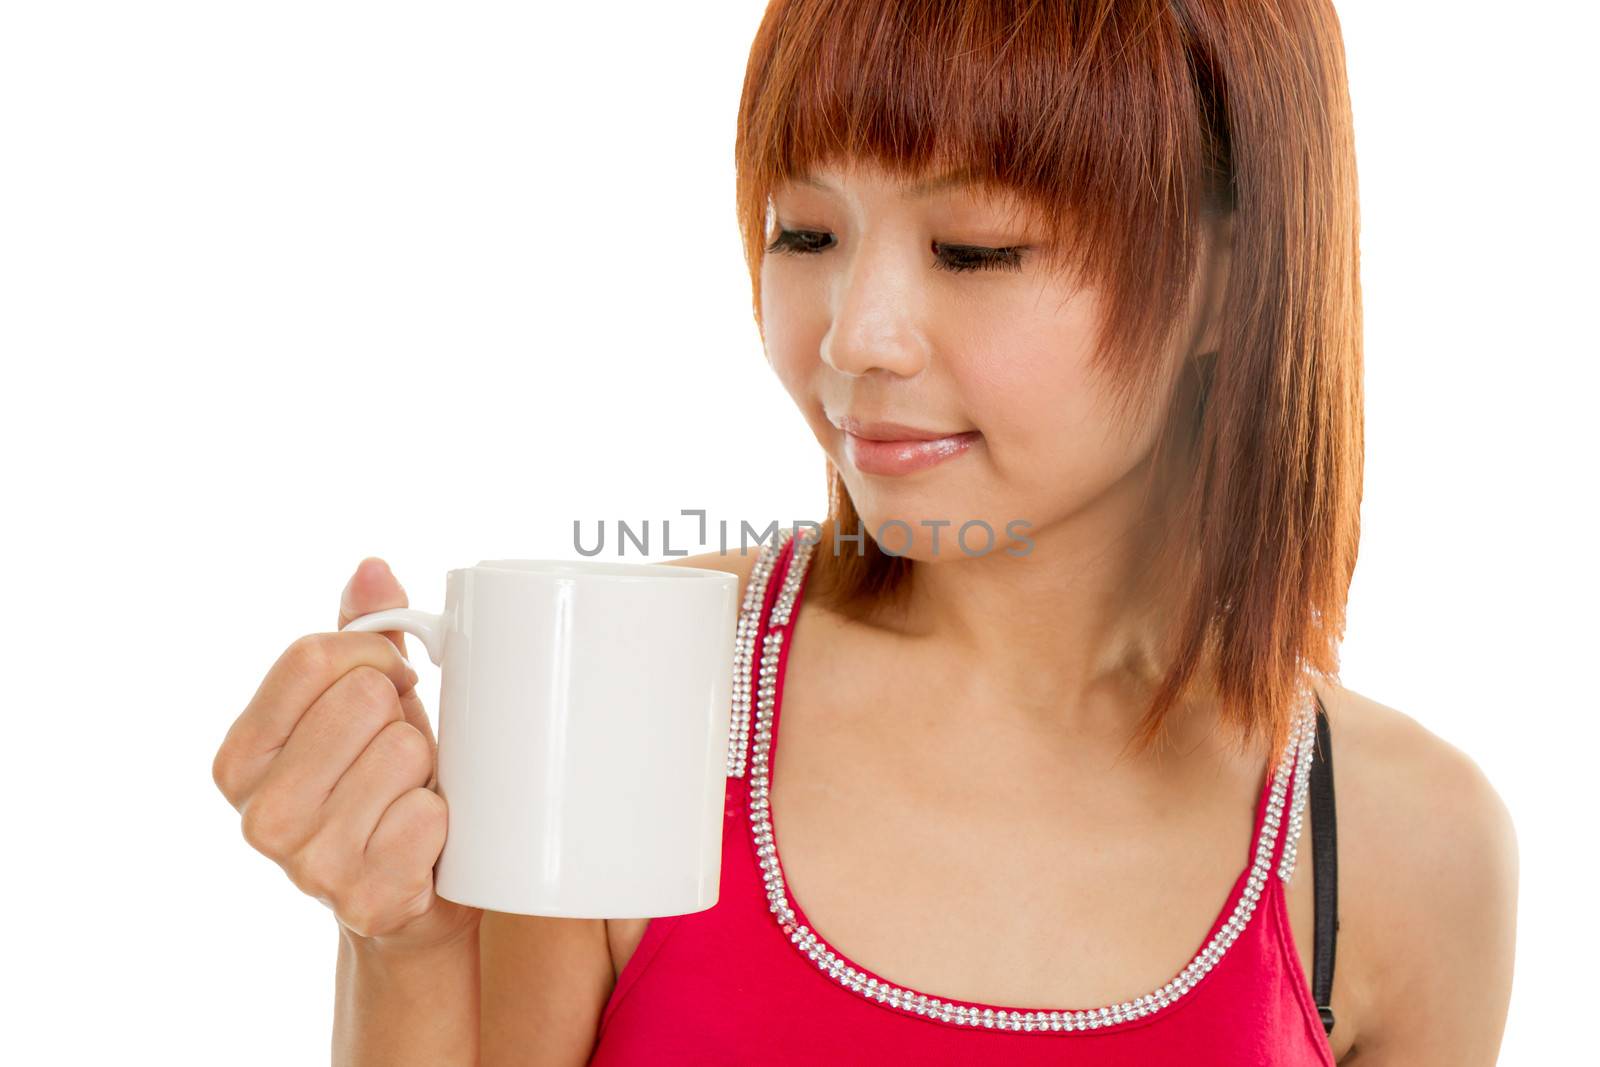 Chinese female in red dress with coffee cup